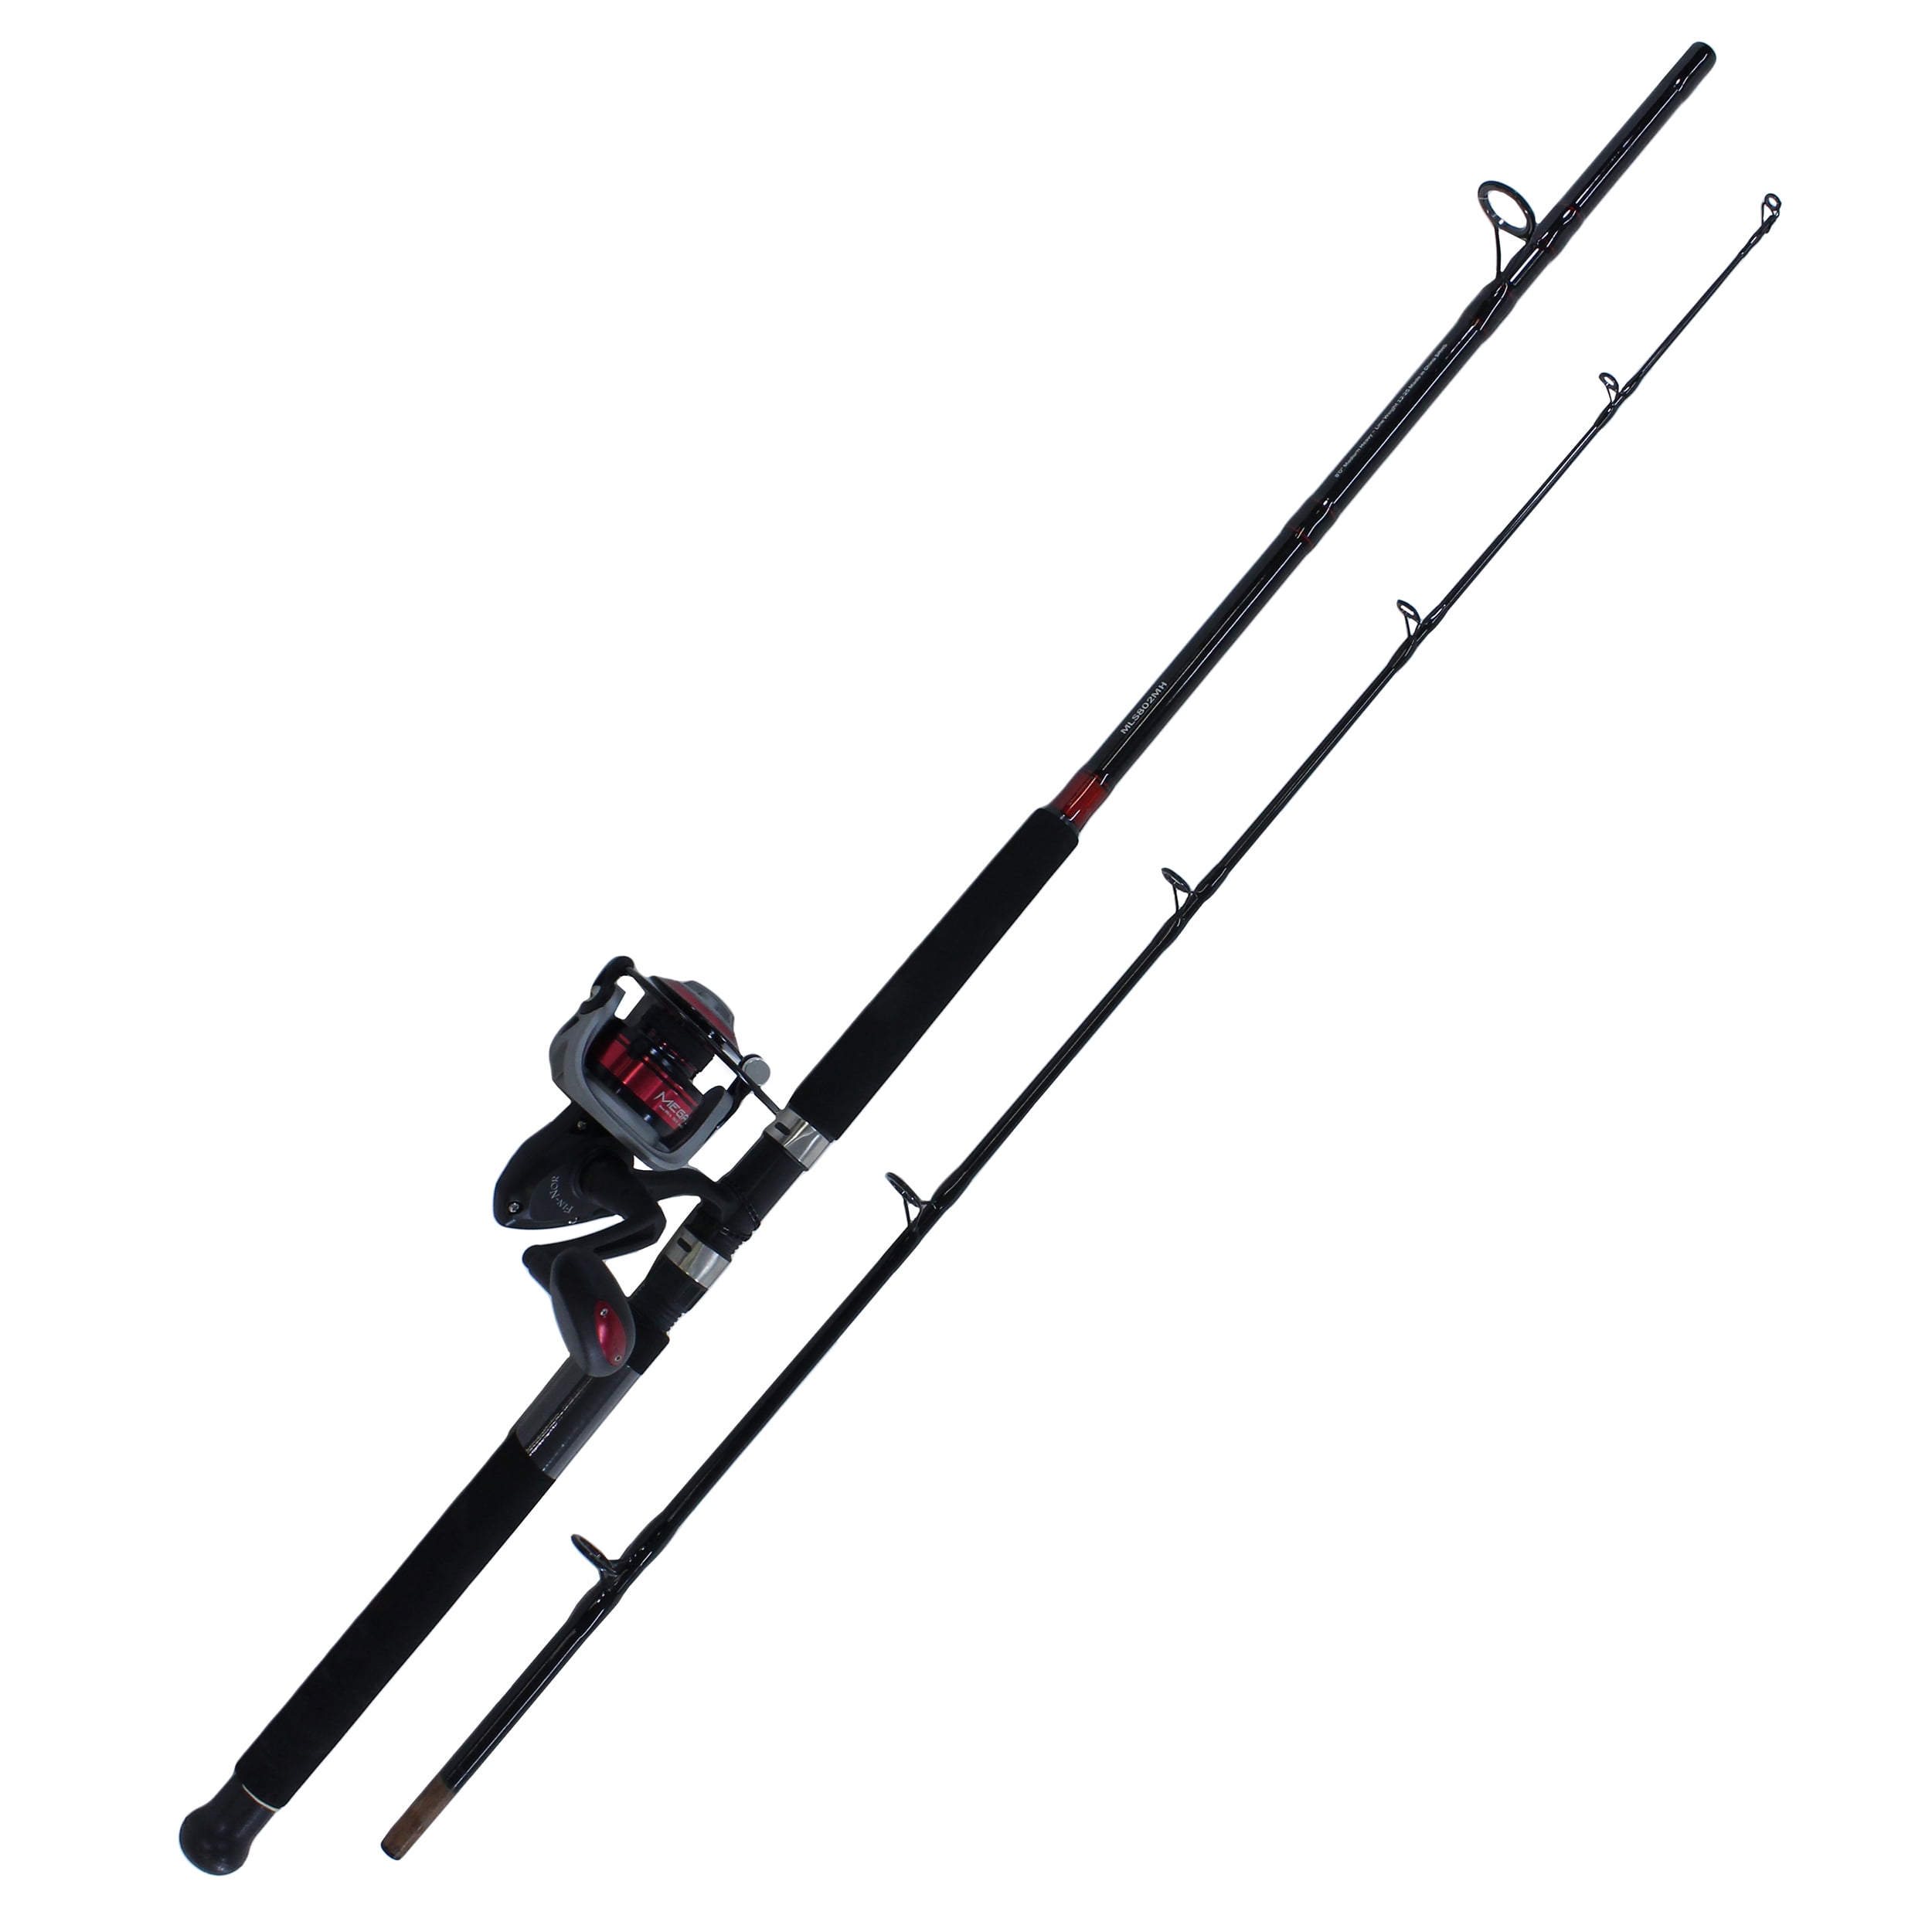 Quantum Drive Spinning Reel and Fishing Rod Combo, 2-Piece IM7 Graphite Rod  with Split-Grip EVA Foam Rod Handle, Continuous Anti-Reverse Fishing Reel